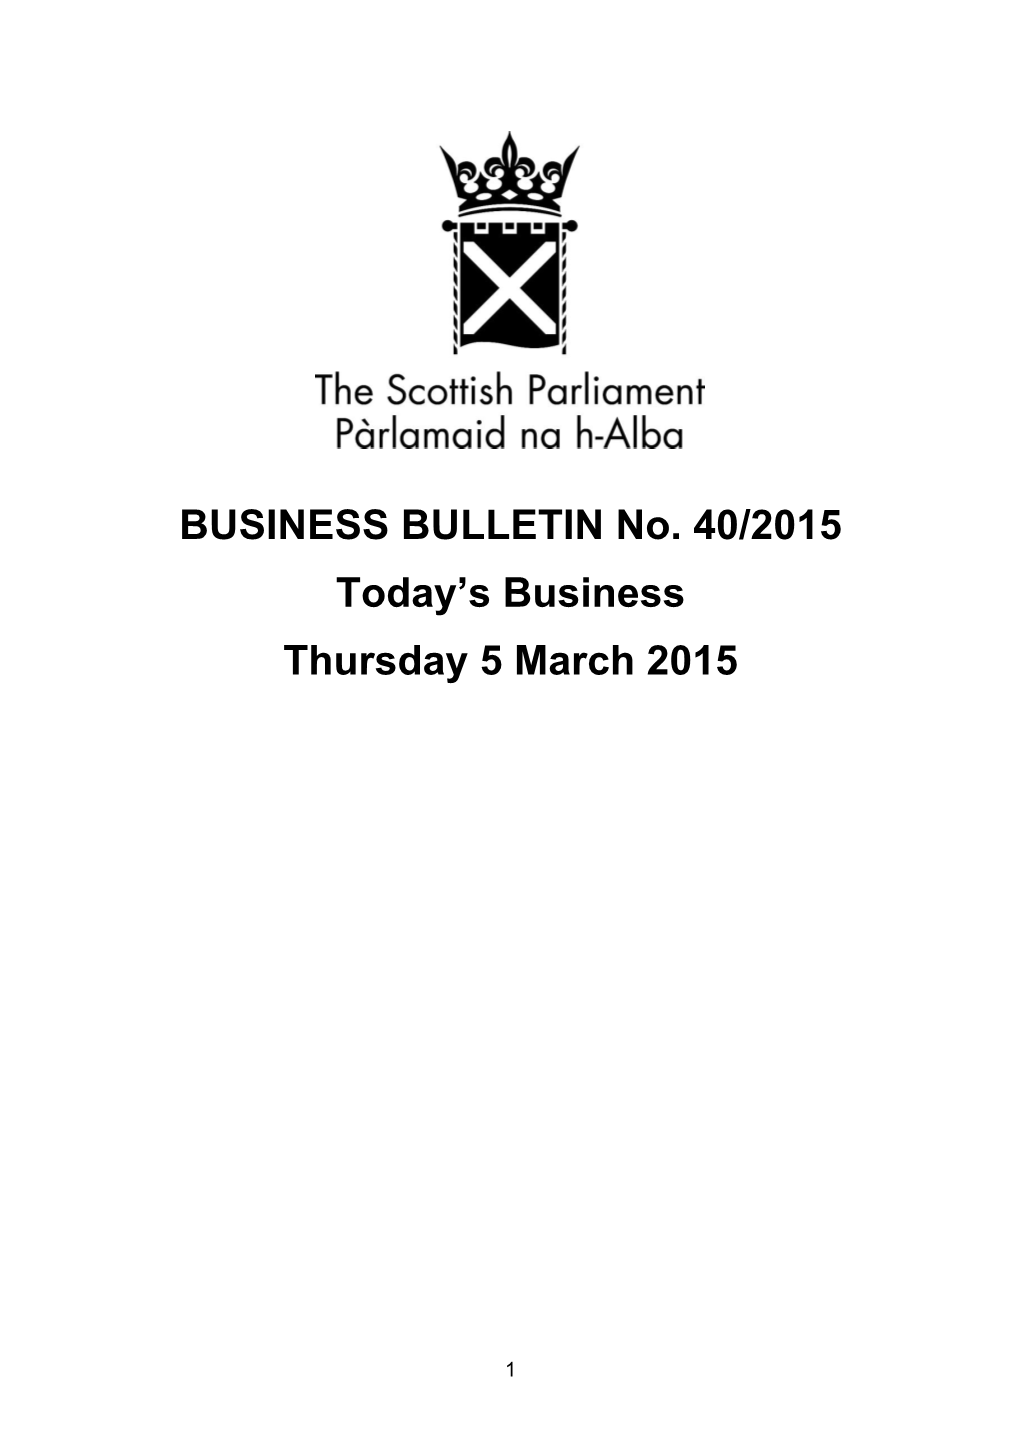 BUSINESS BULLETIN No. 40/2015 Today's